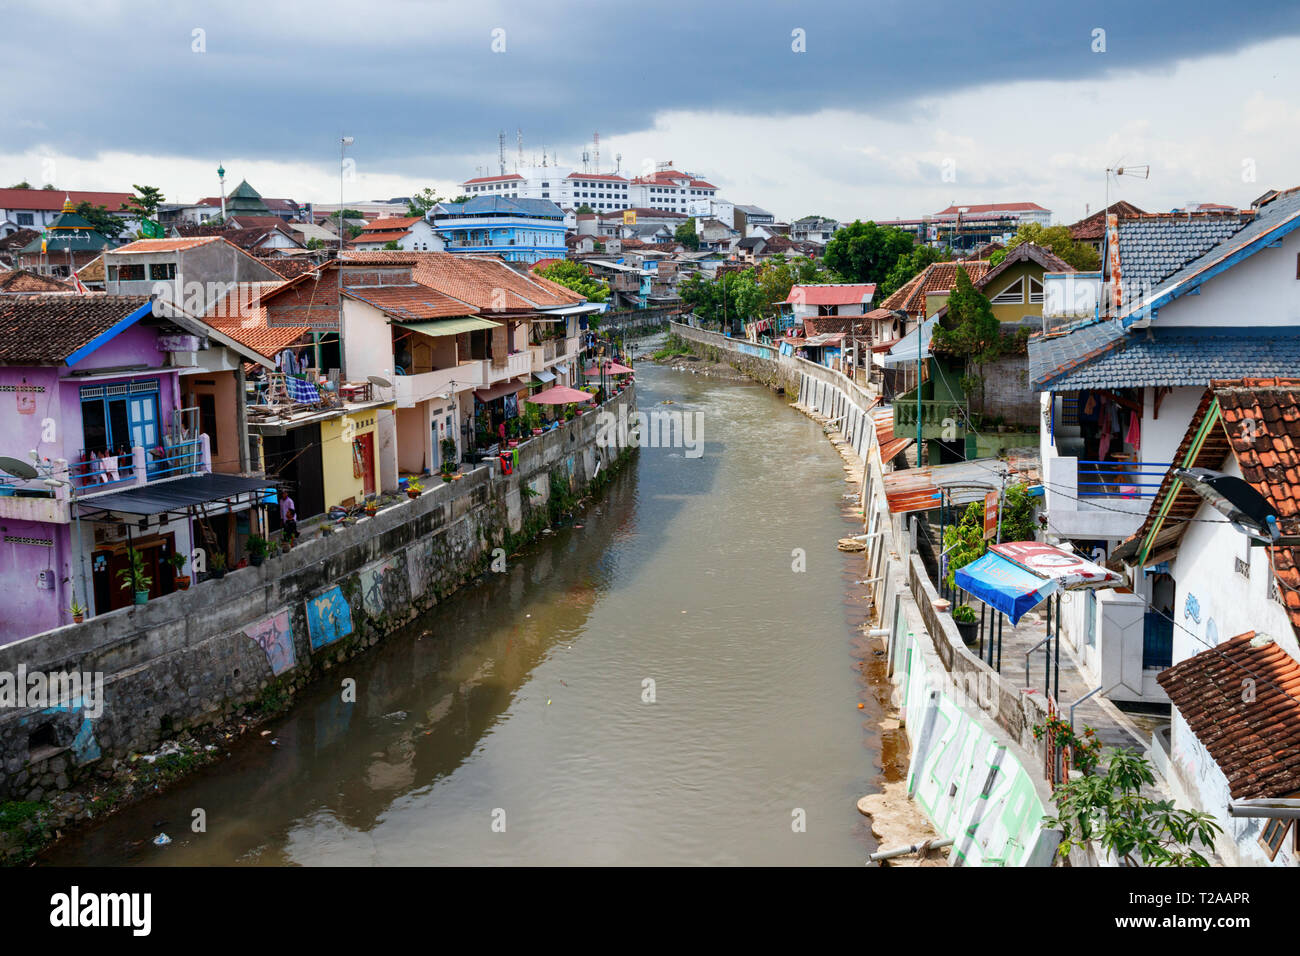 View from the Jalan Mas Soeharto over a poor neighbourhood and the Kali Code, a small river flowing through Yogyakarta, Java, Indonesia. Stock Photo